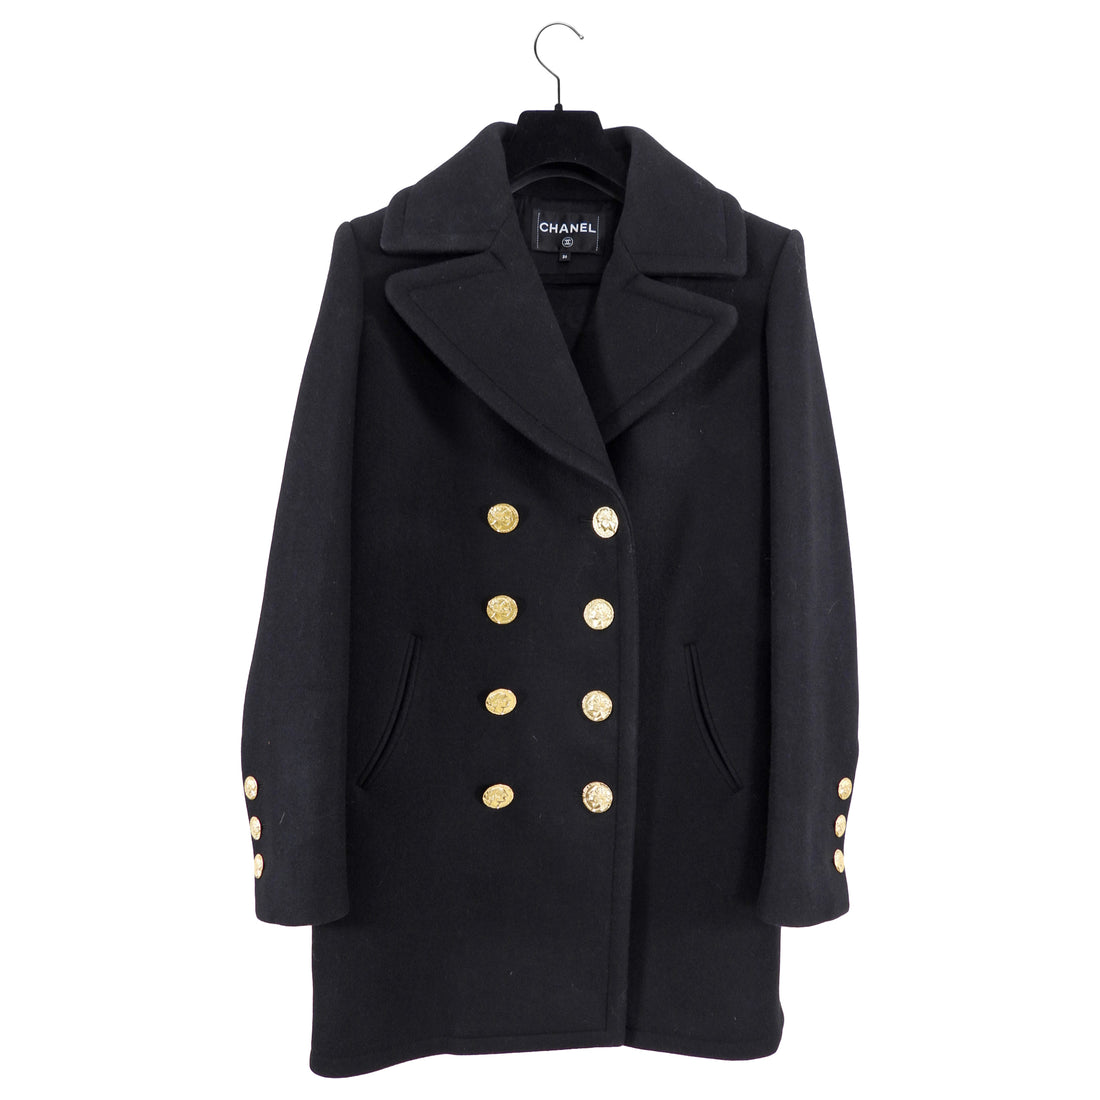 Chanel 16A Black Cashmere Coat with Gold Roman Coin Buttons - FR36 / 38